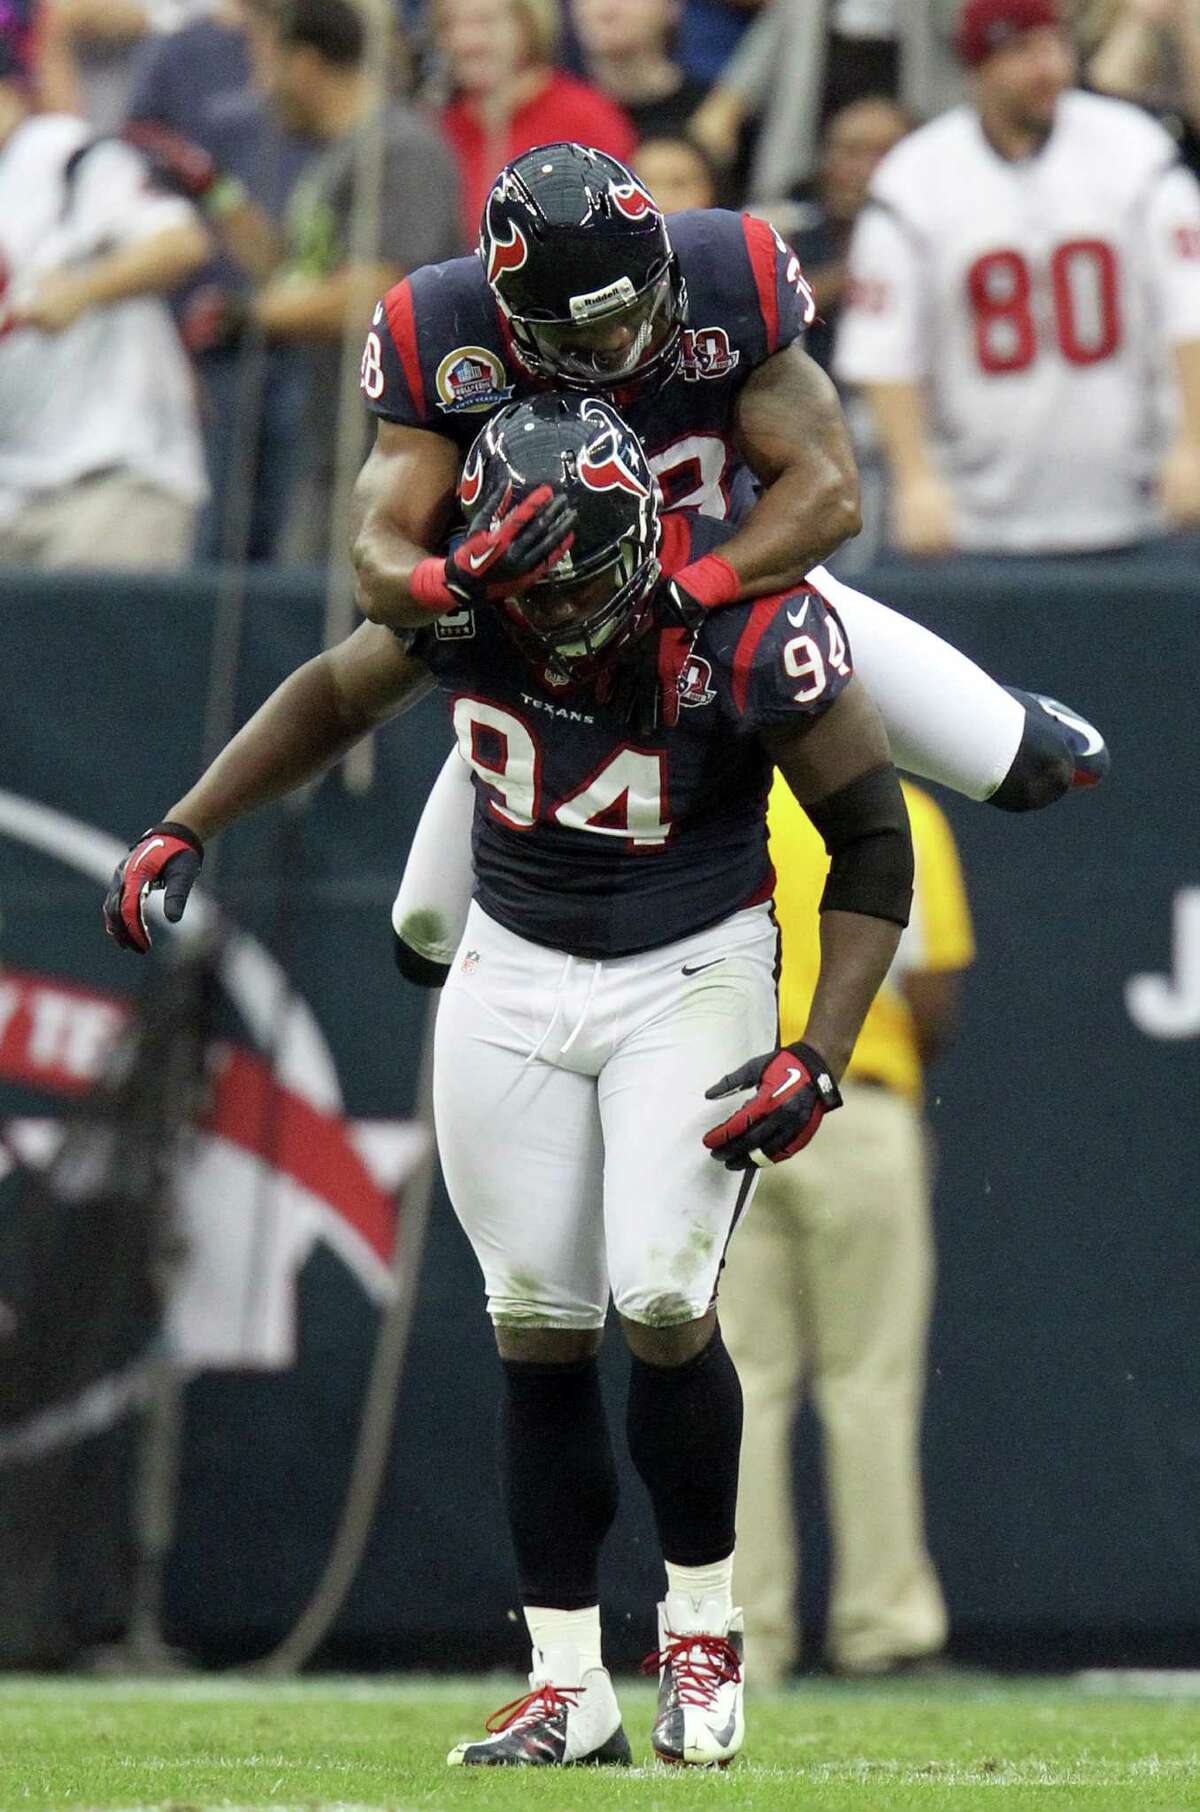 Houston Texans free safety Danieal Manning (38) jumps up on Houston Texans defensive end Antonio Smith (94) after his sack during the first quarter of an NFL football game at Reliant Stadium, Sunday, Dec. 16, 2012, in Houston.